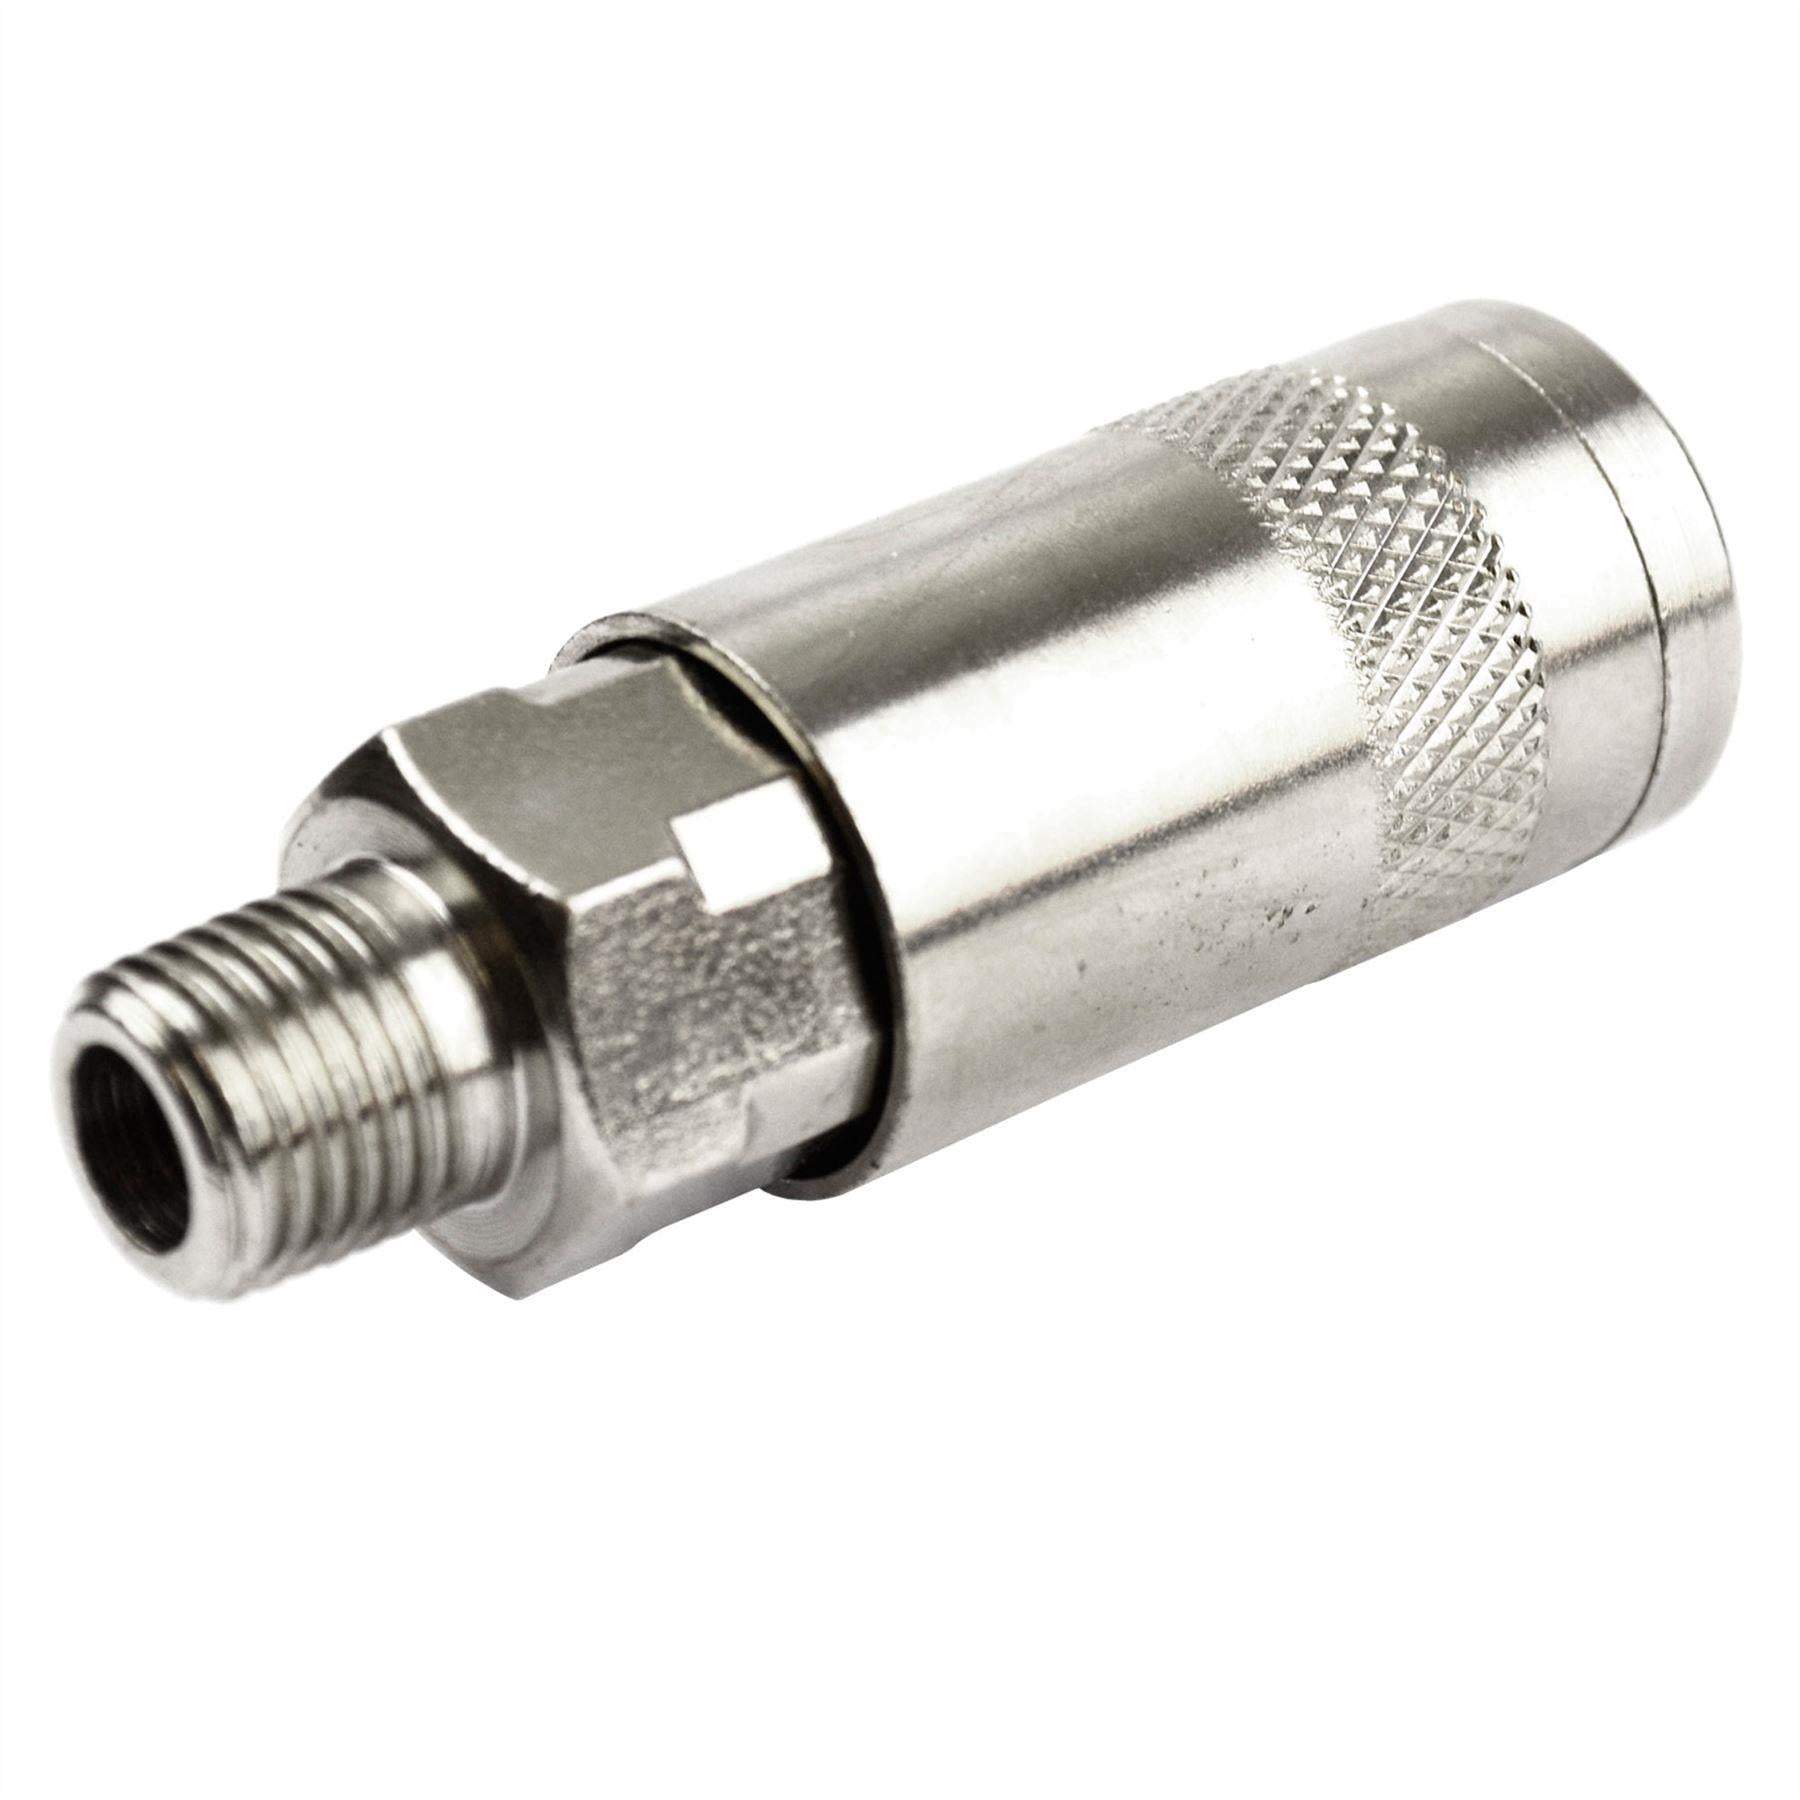 1/4” BSP Quick Release Coupler Connector With Male Thread For Air Hose Compressors